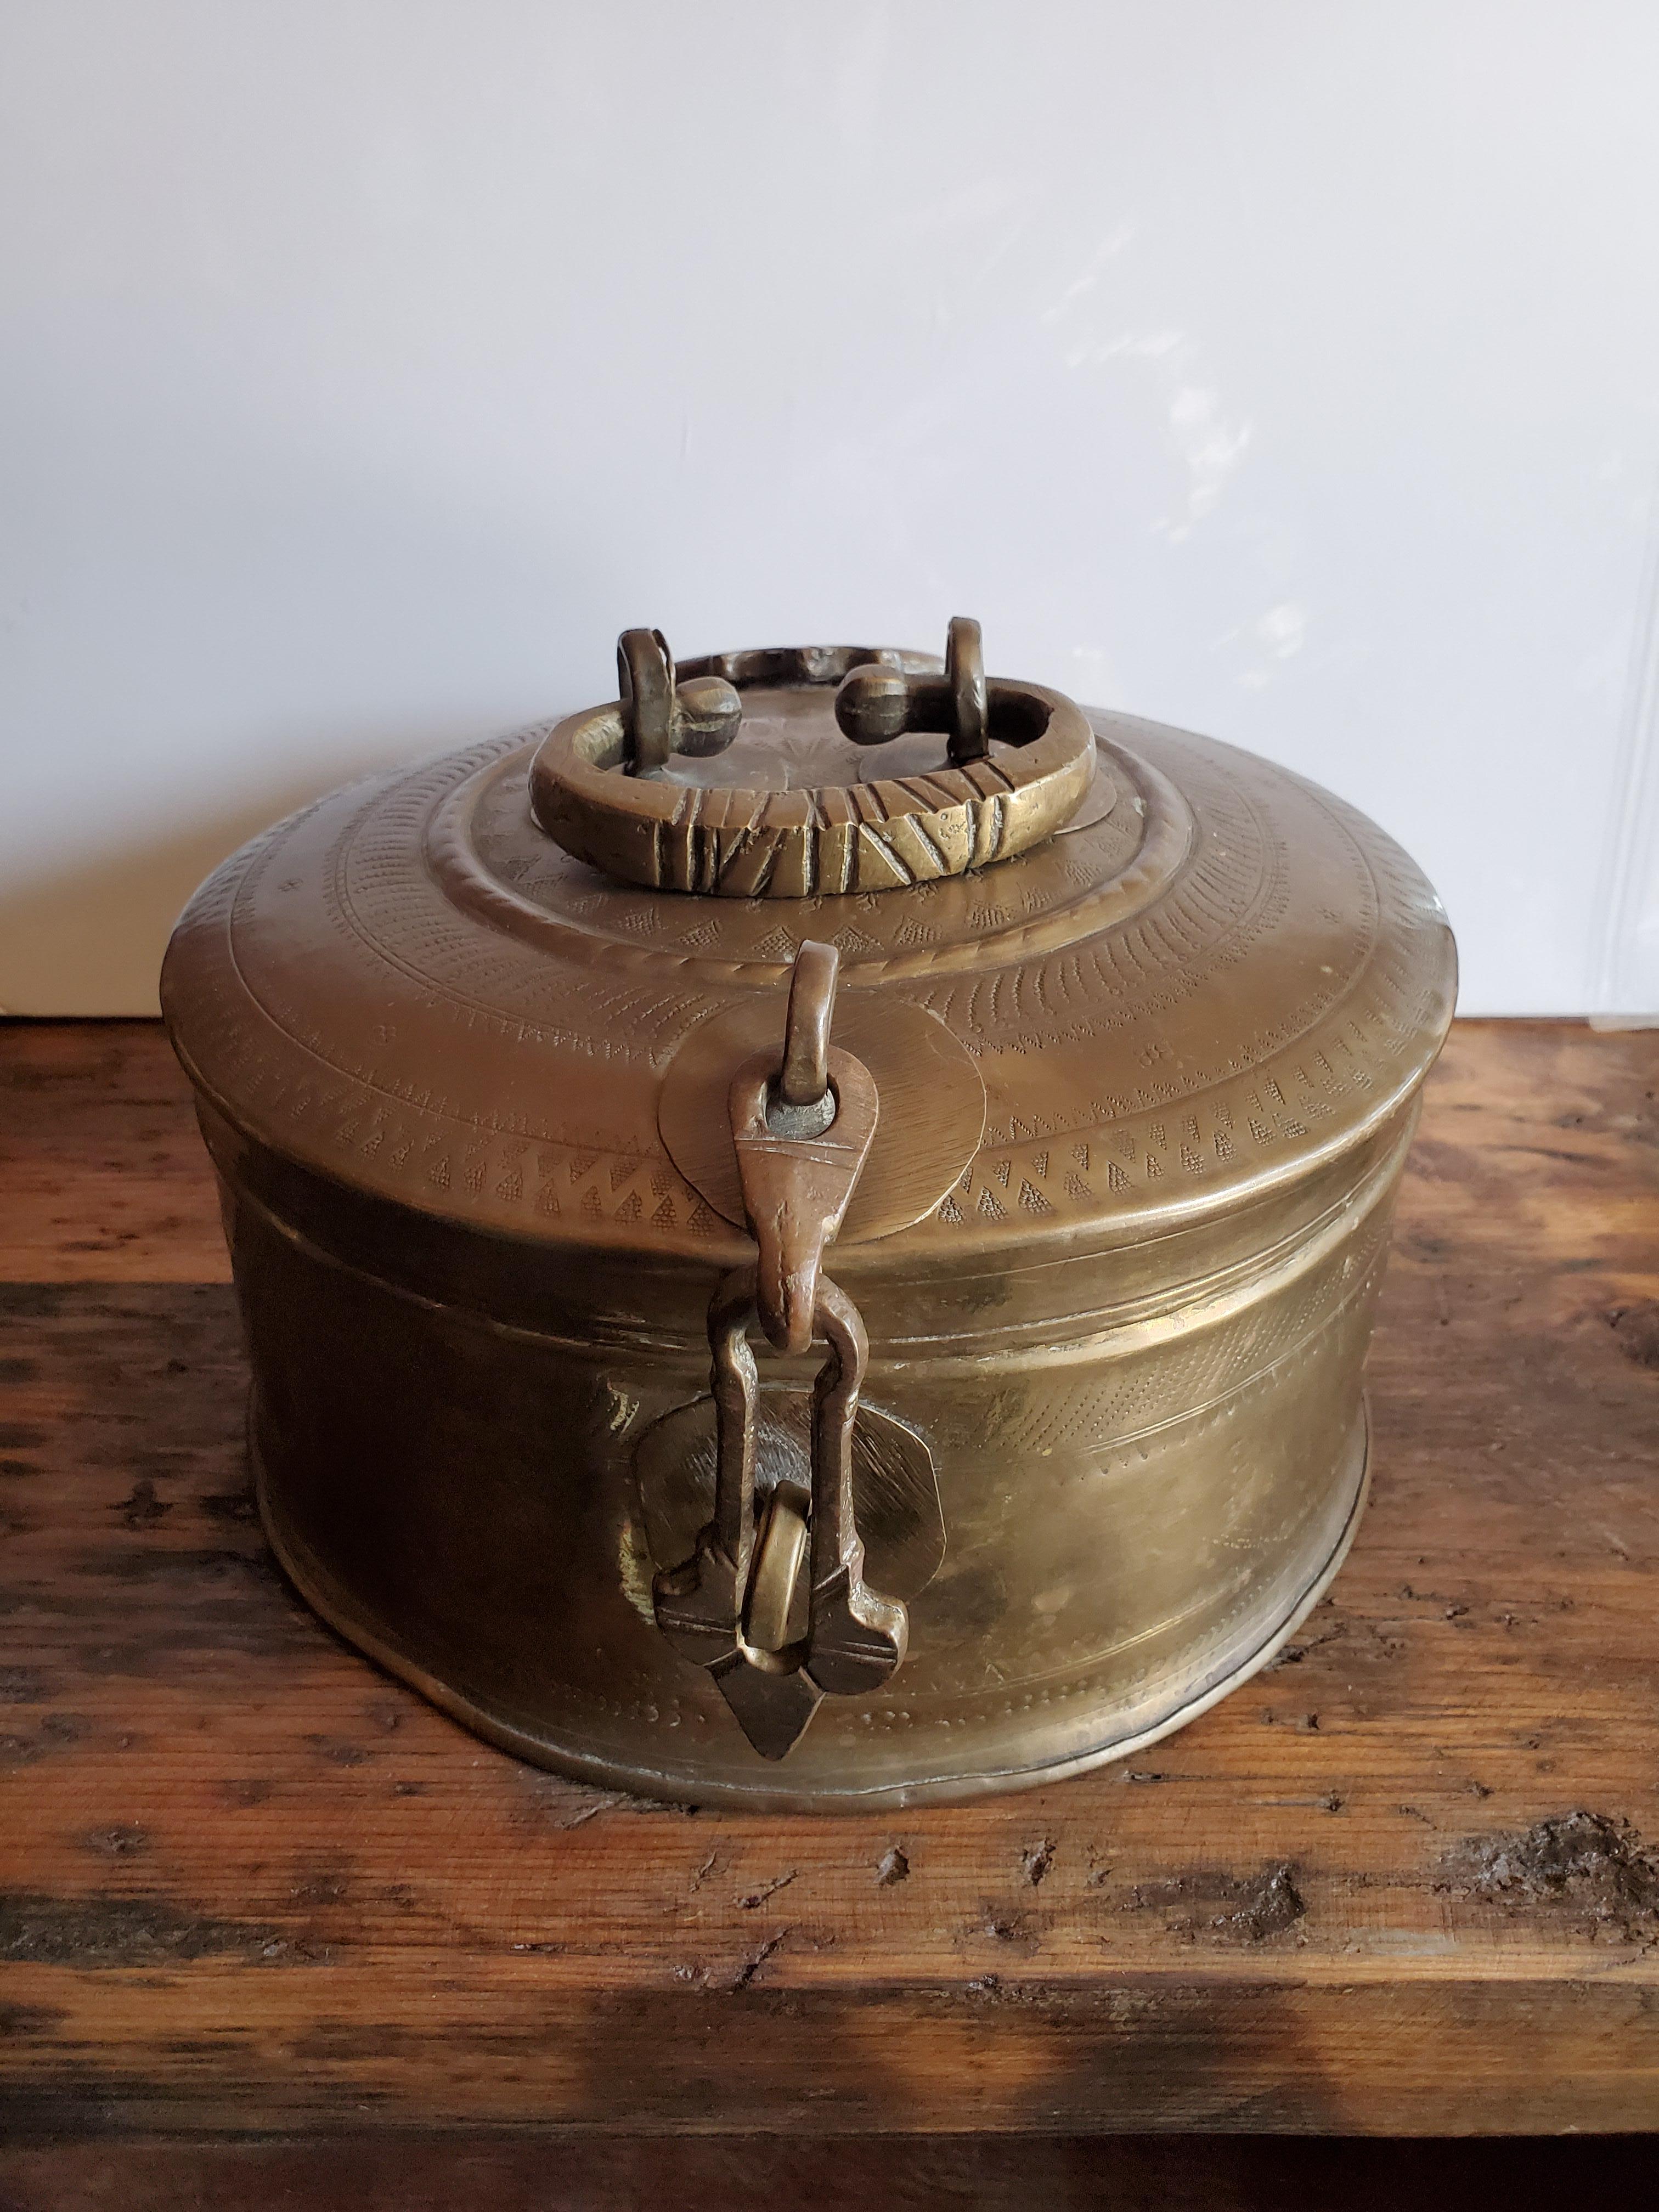 In remarkable condition.
Made from brass (and possibly other metals as well), this beautiful Asian spice box is a few decades old, and has a few signs of signs of wear and tear. Great for decoration with its amazing hammering patterns throughout.